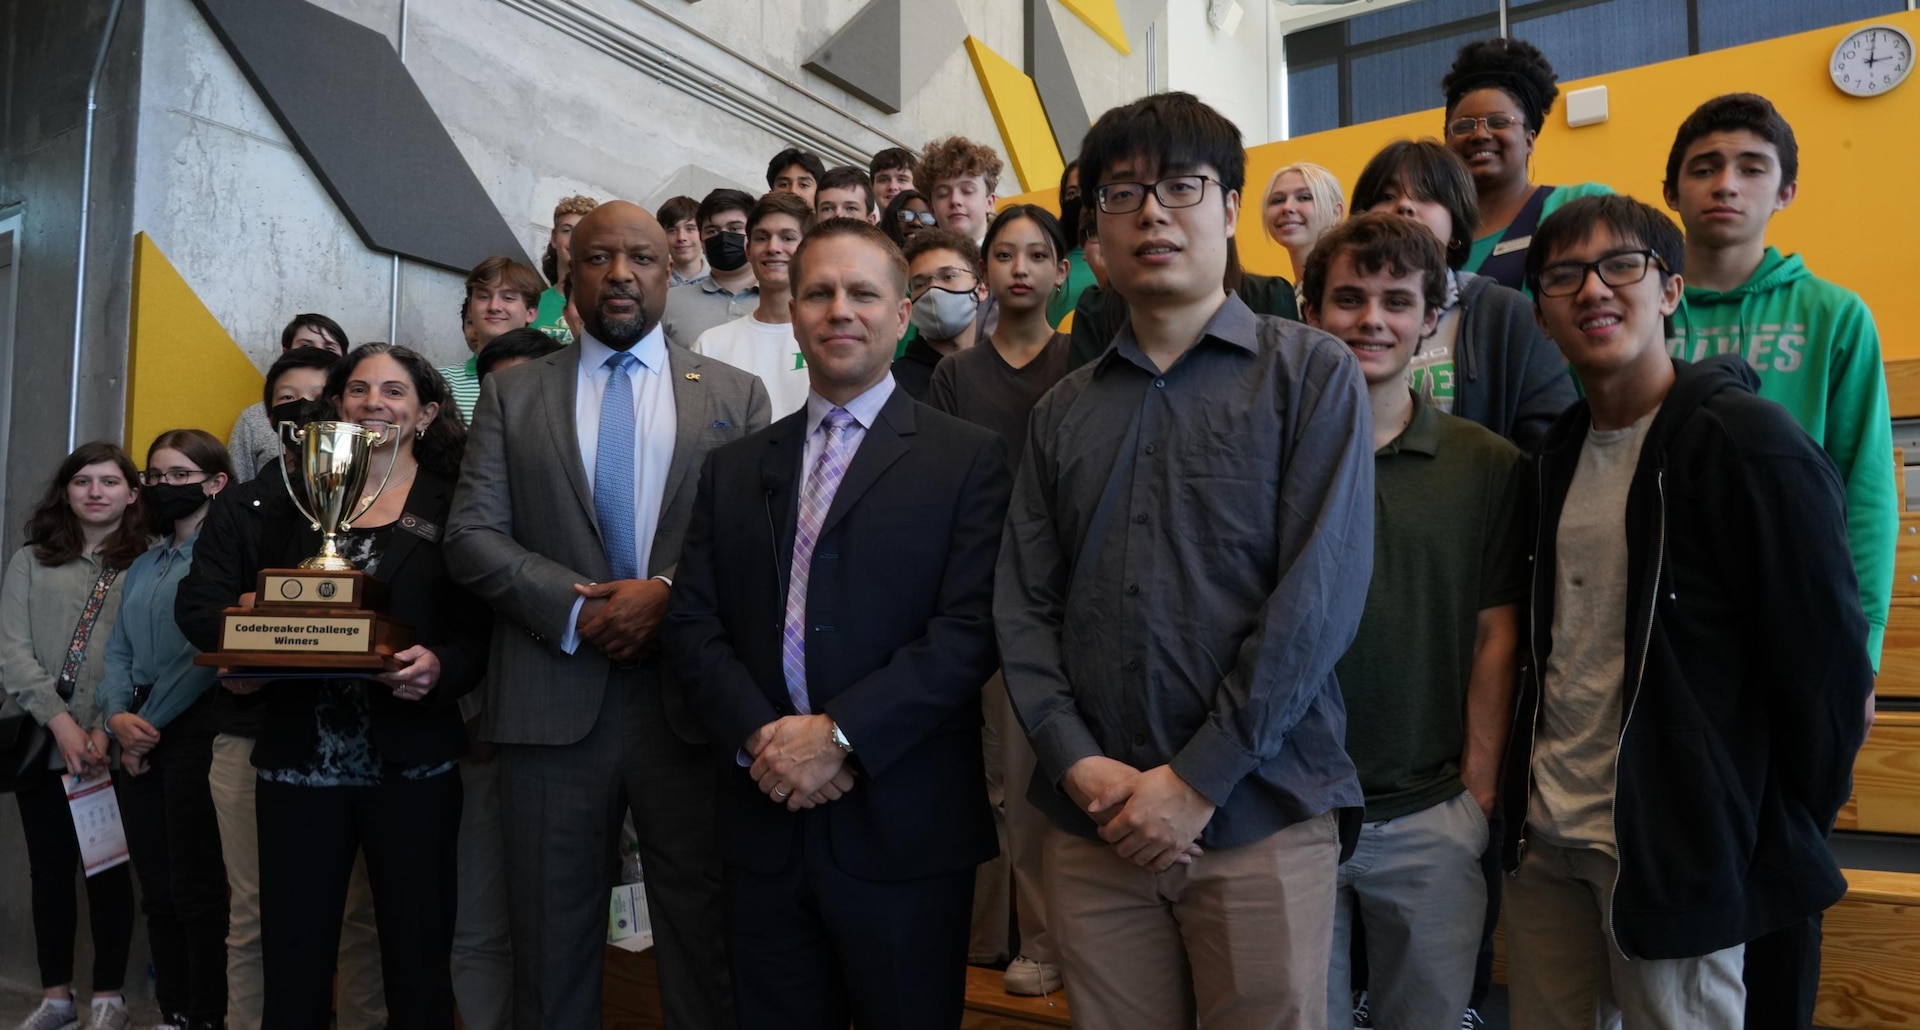 NSA and Georgia Tech leadership pose with victorious members of last year's Codebreaker Challenge.